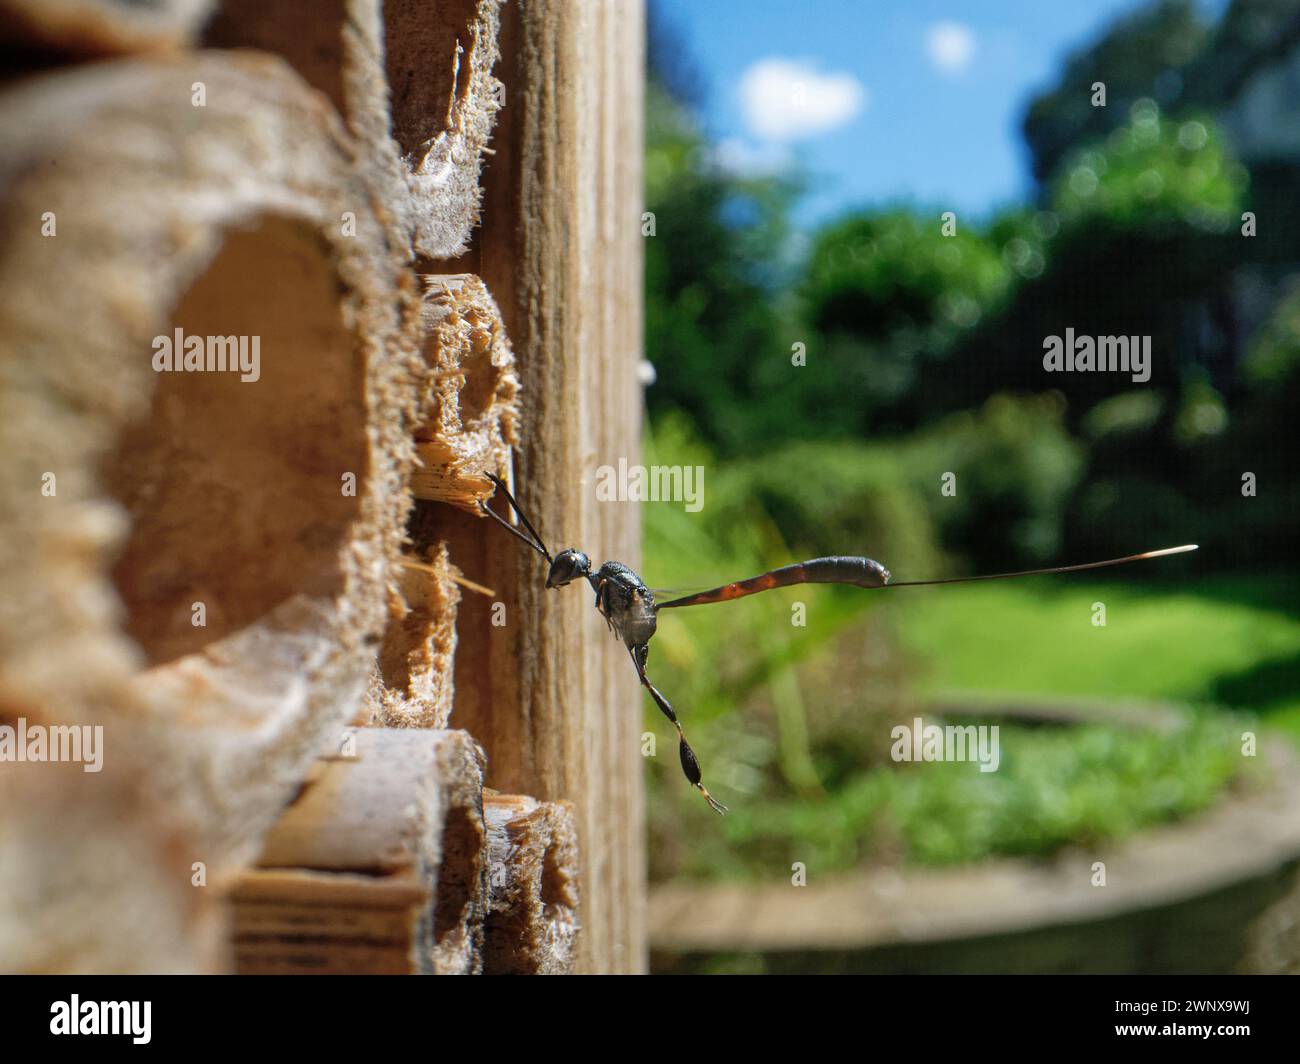 Great pennant wasp / Wild carrot wasp (Gasteruption jaculator), a parasite of solitary bees and wasps, hovering by host nests in an insect hotel, UK. Stock Photo